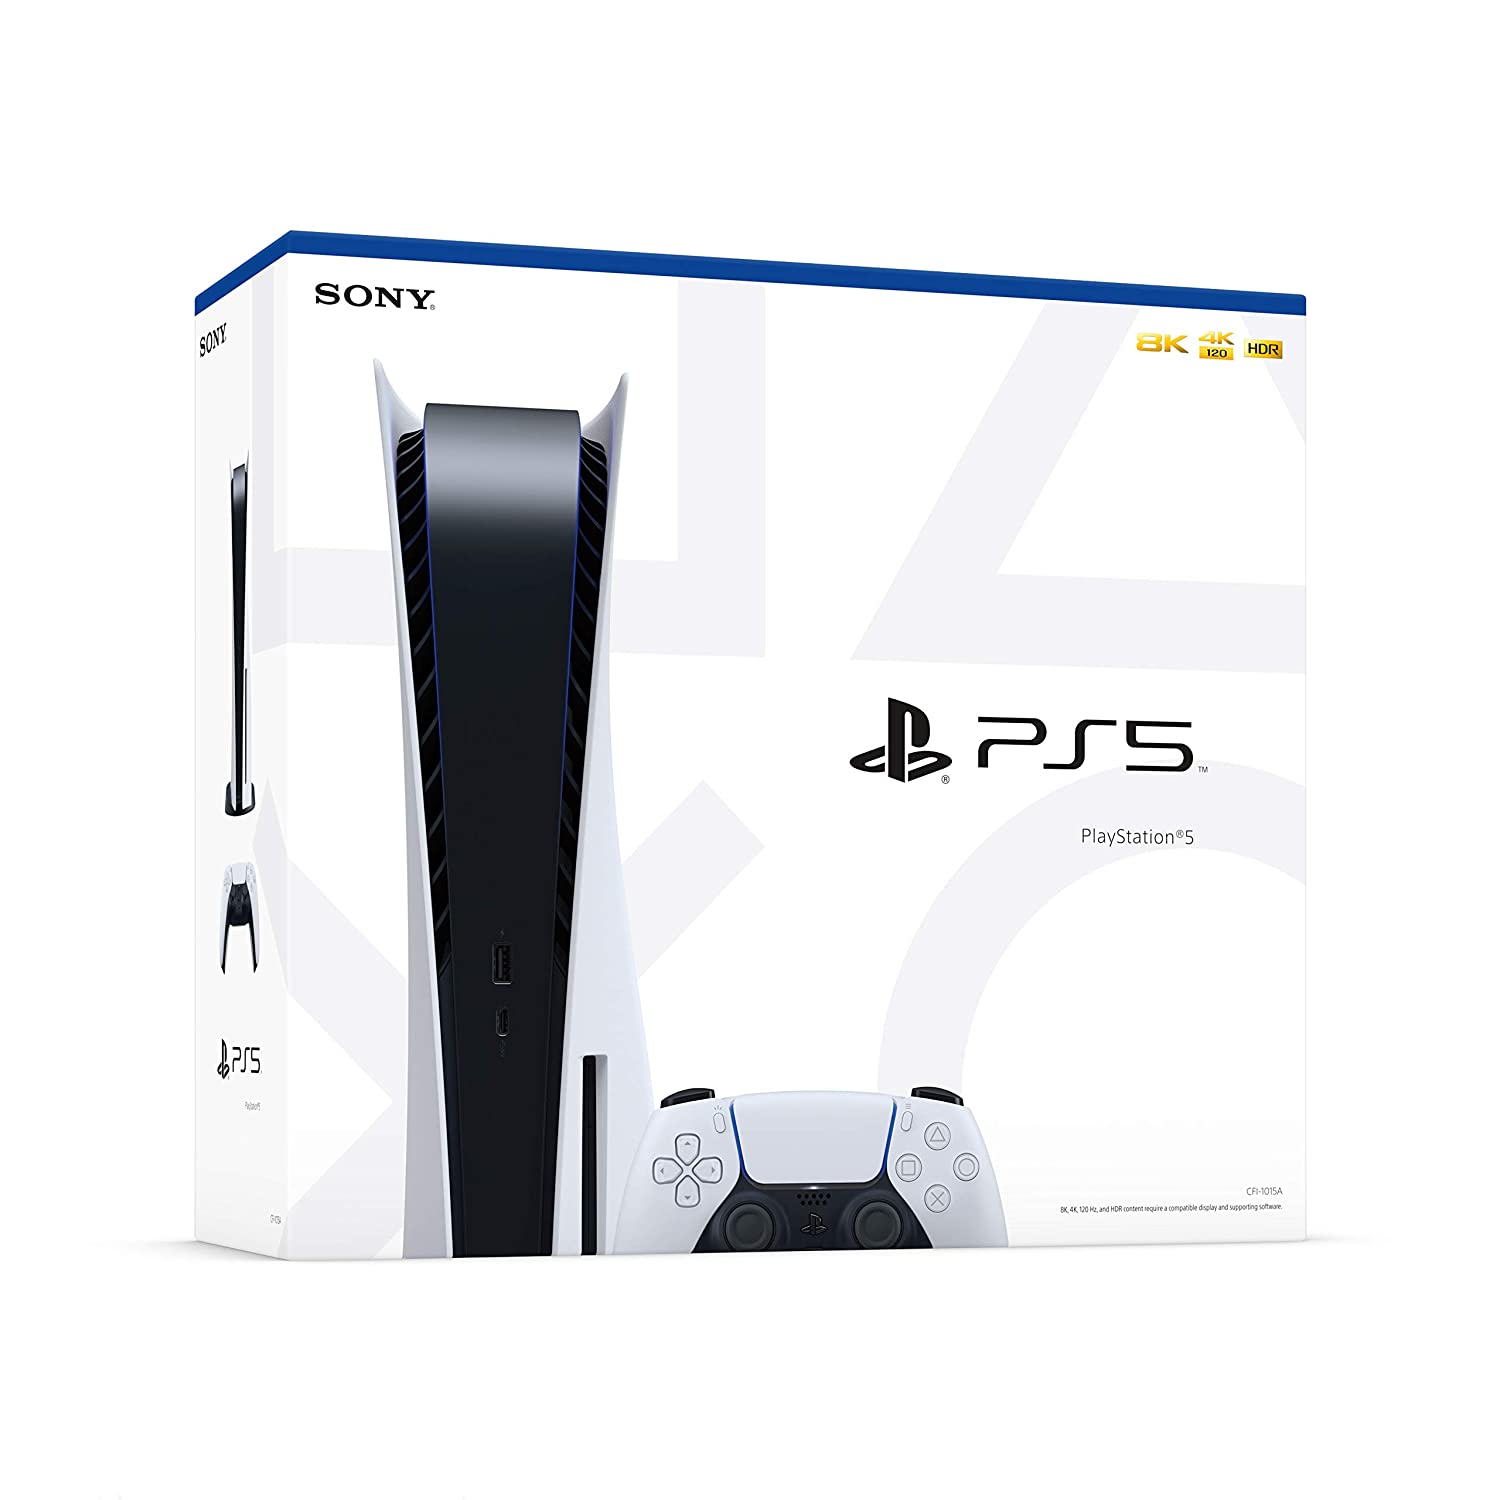 Sony Playstation 5 Disc Version (Sony PS5 Disc) Video Game Console - Pro-Distributing